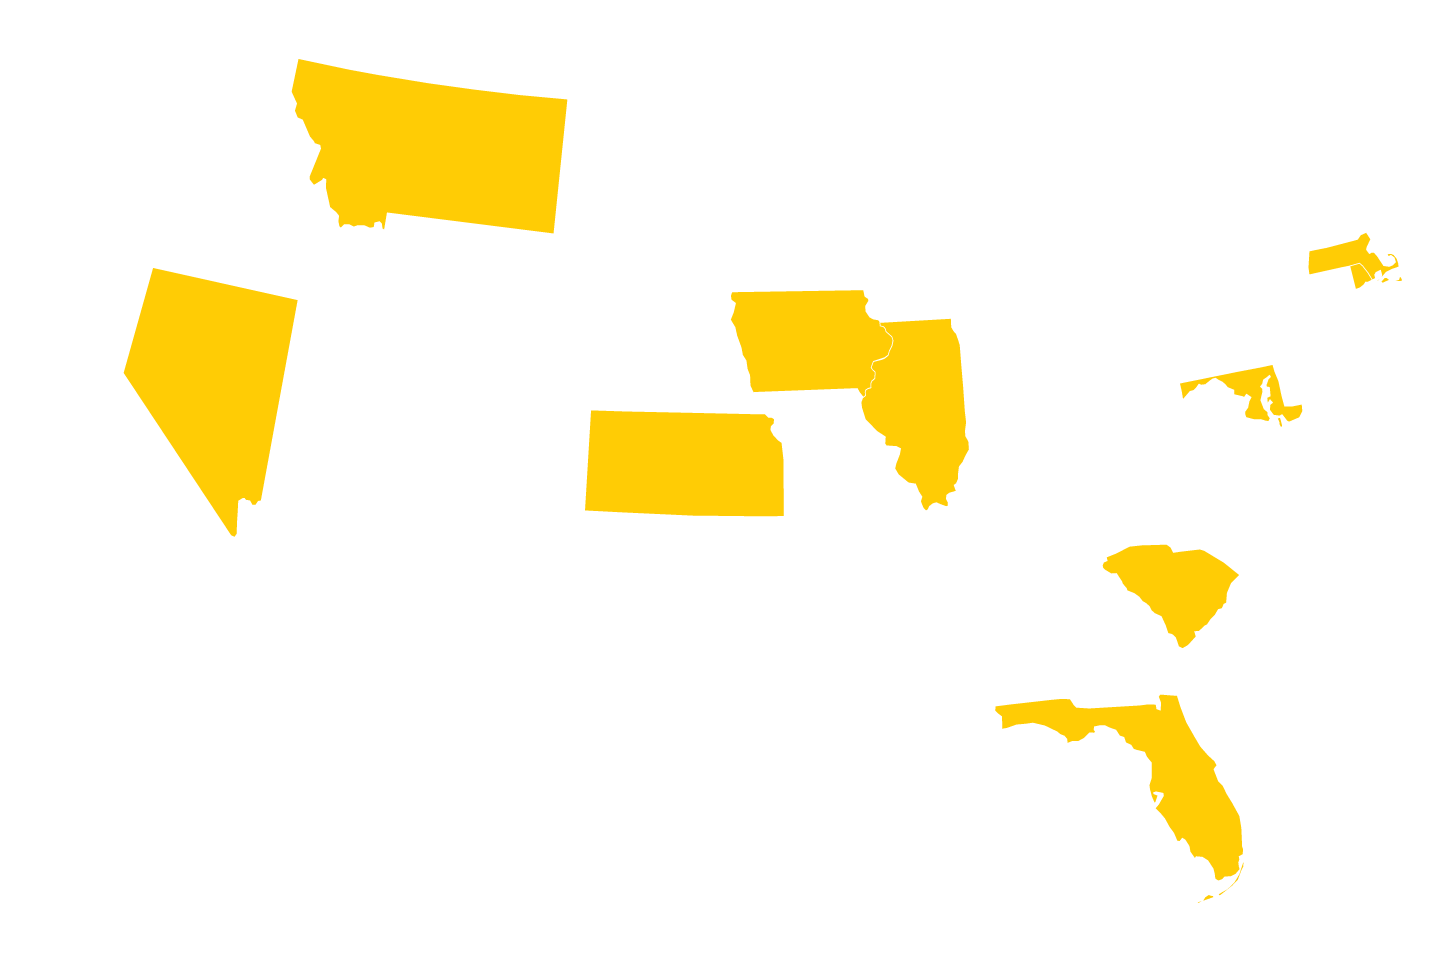 states highlighted in yellow